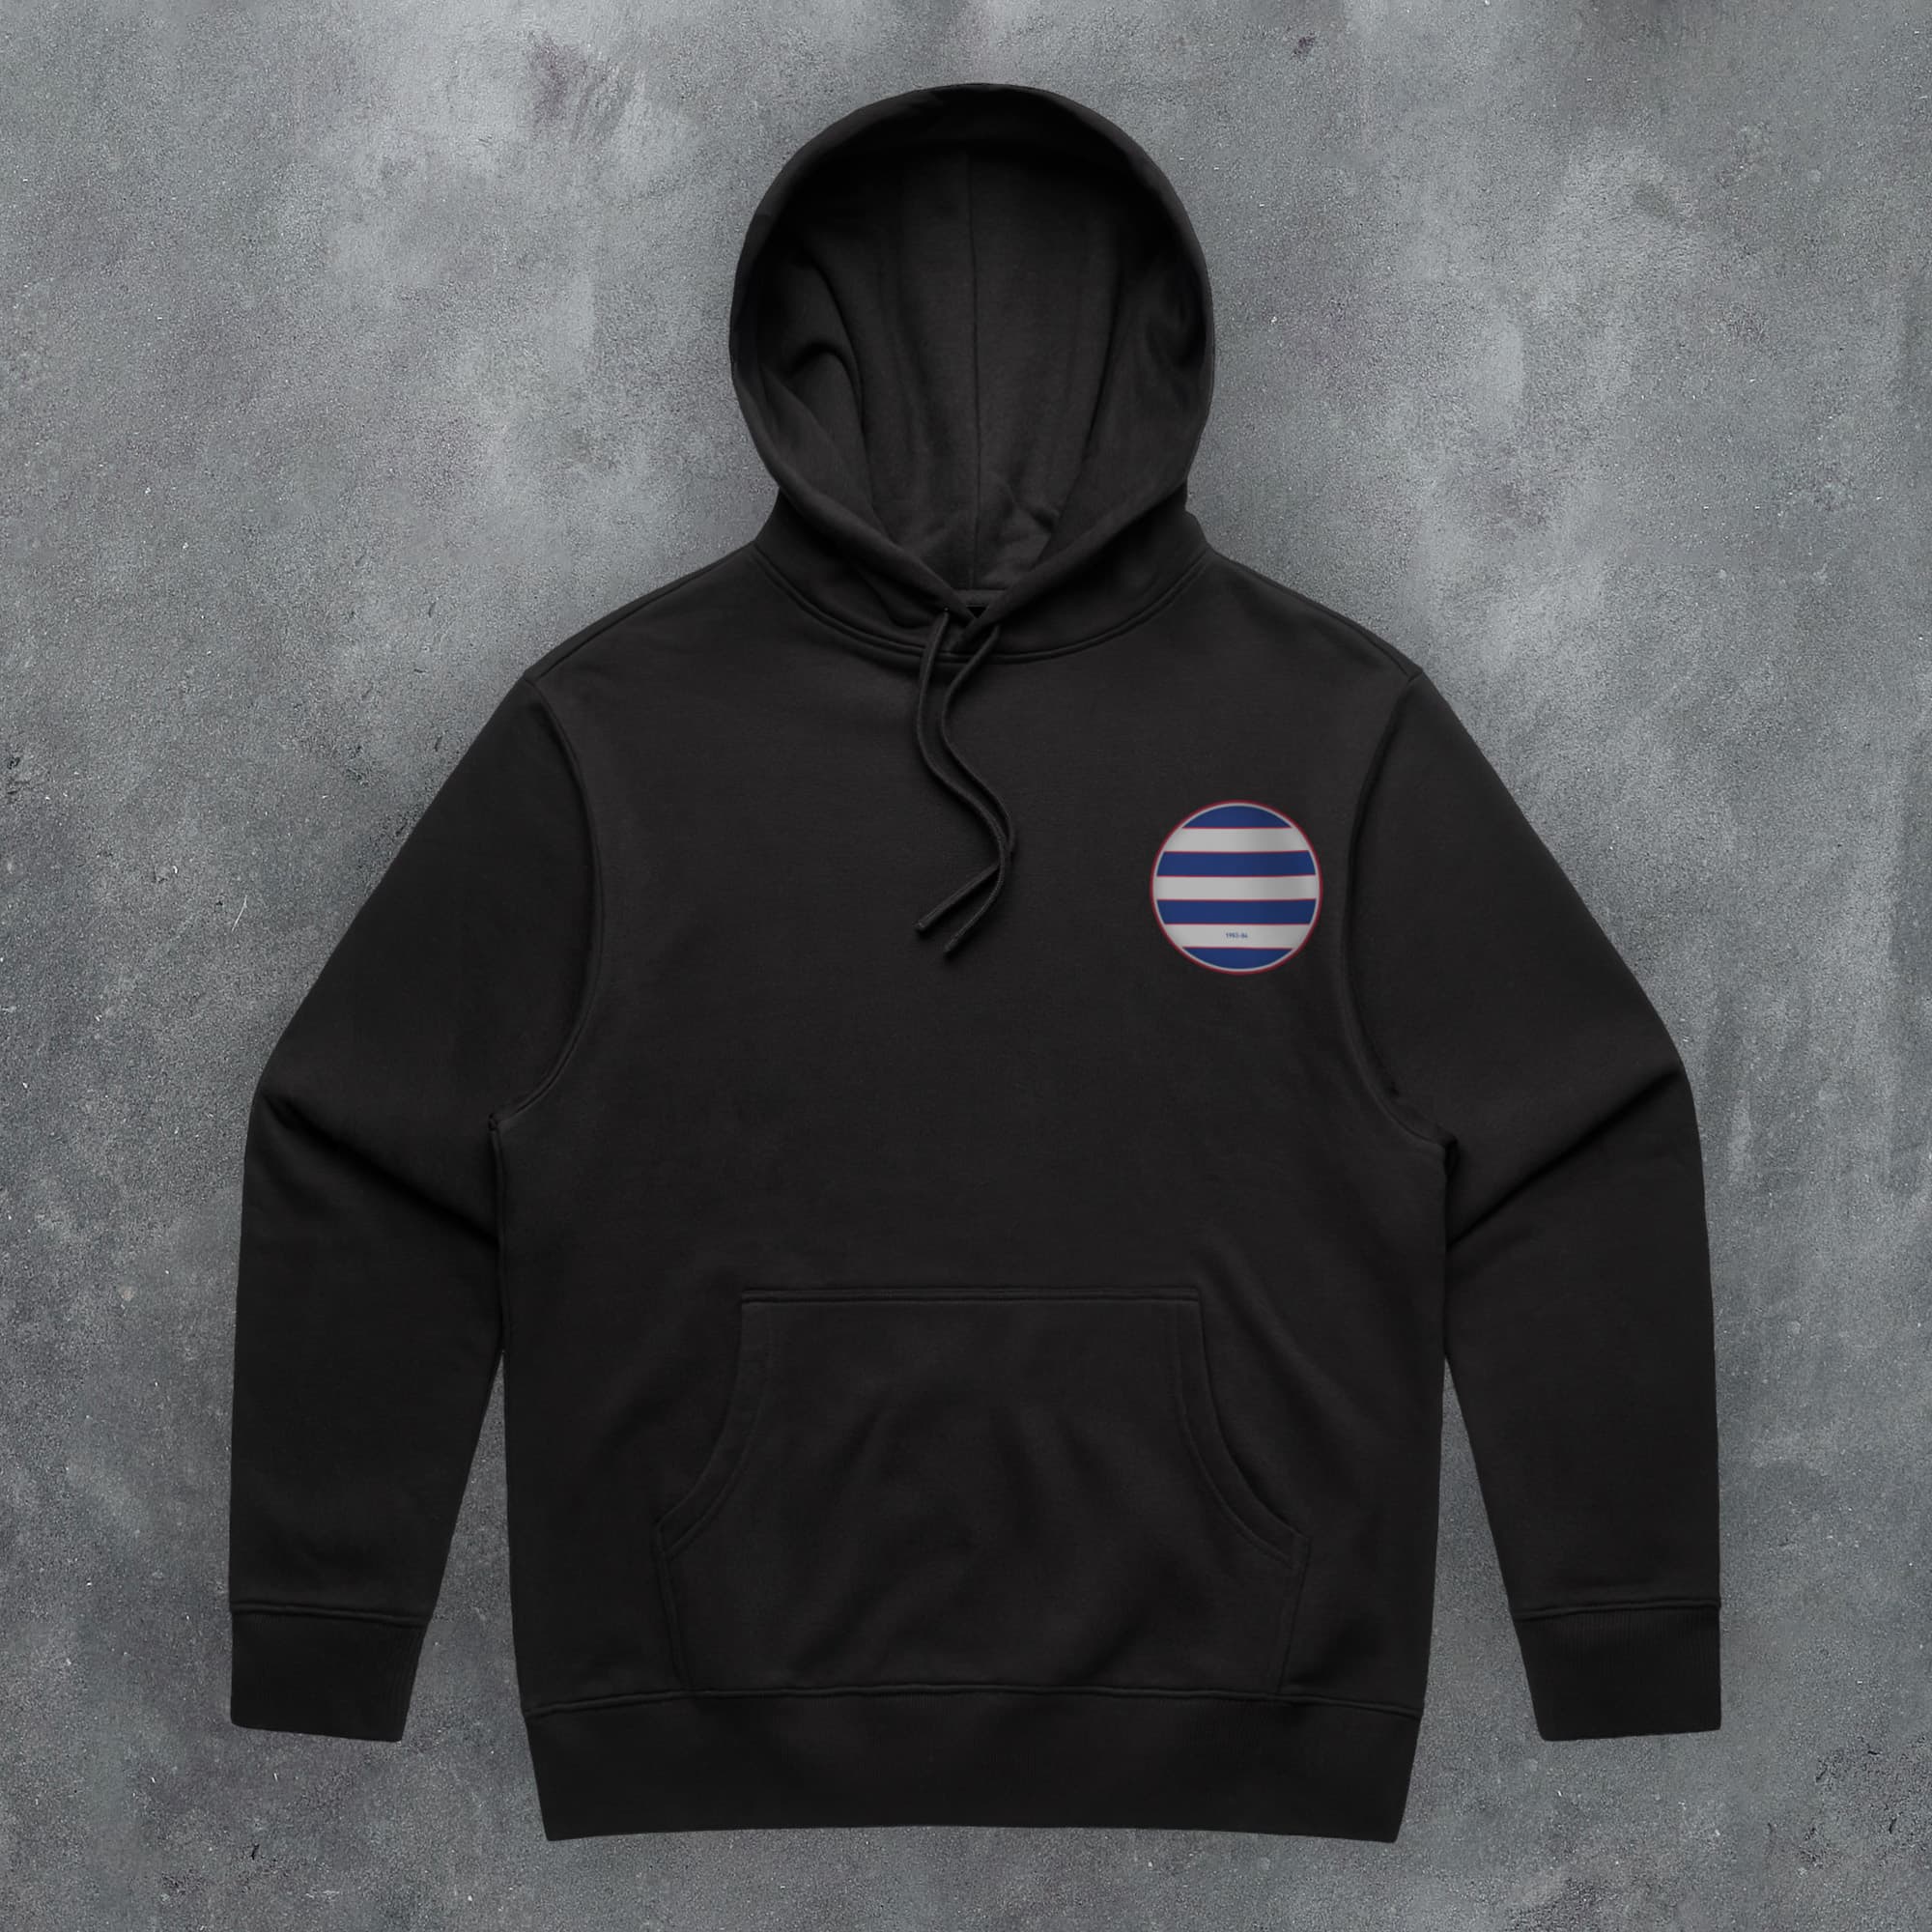 a black hoodie with a blue and white stripe on it